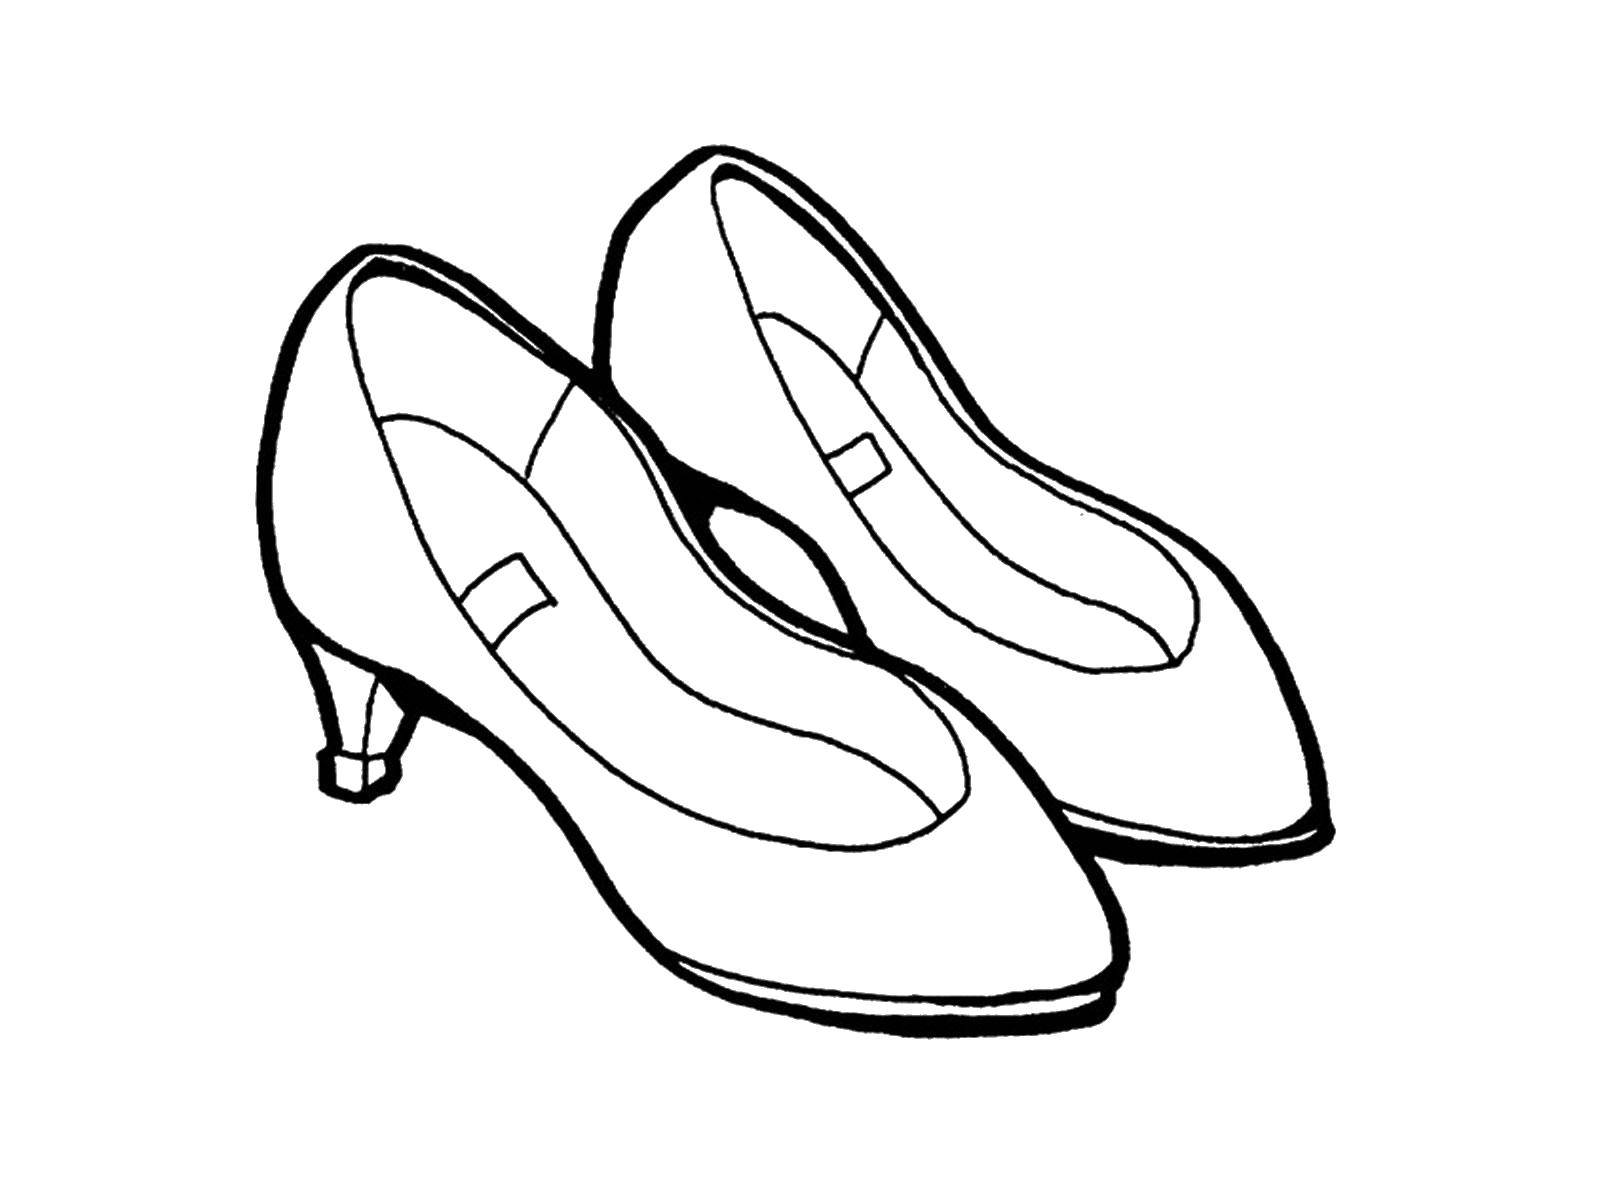 Coloring Beautiful shoes. Category clothing. Tags:  Clothing, shoes, shoes.